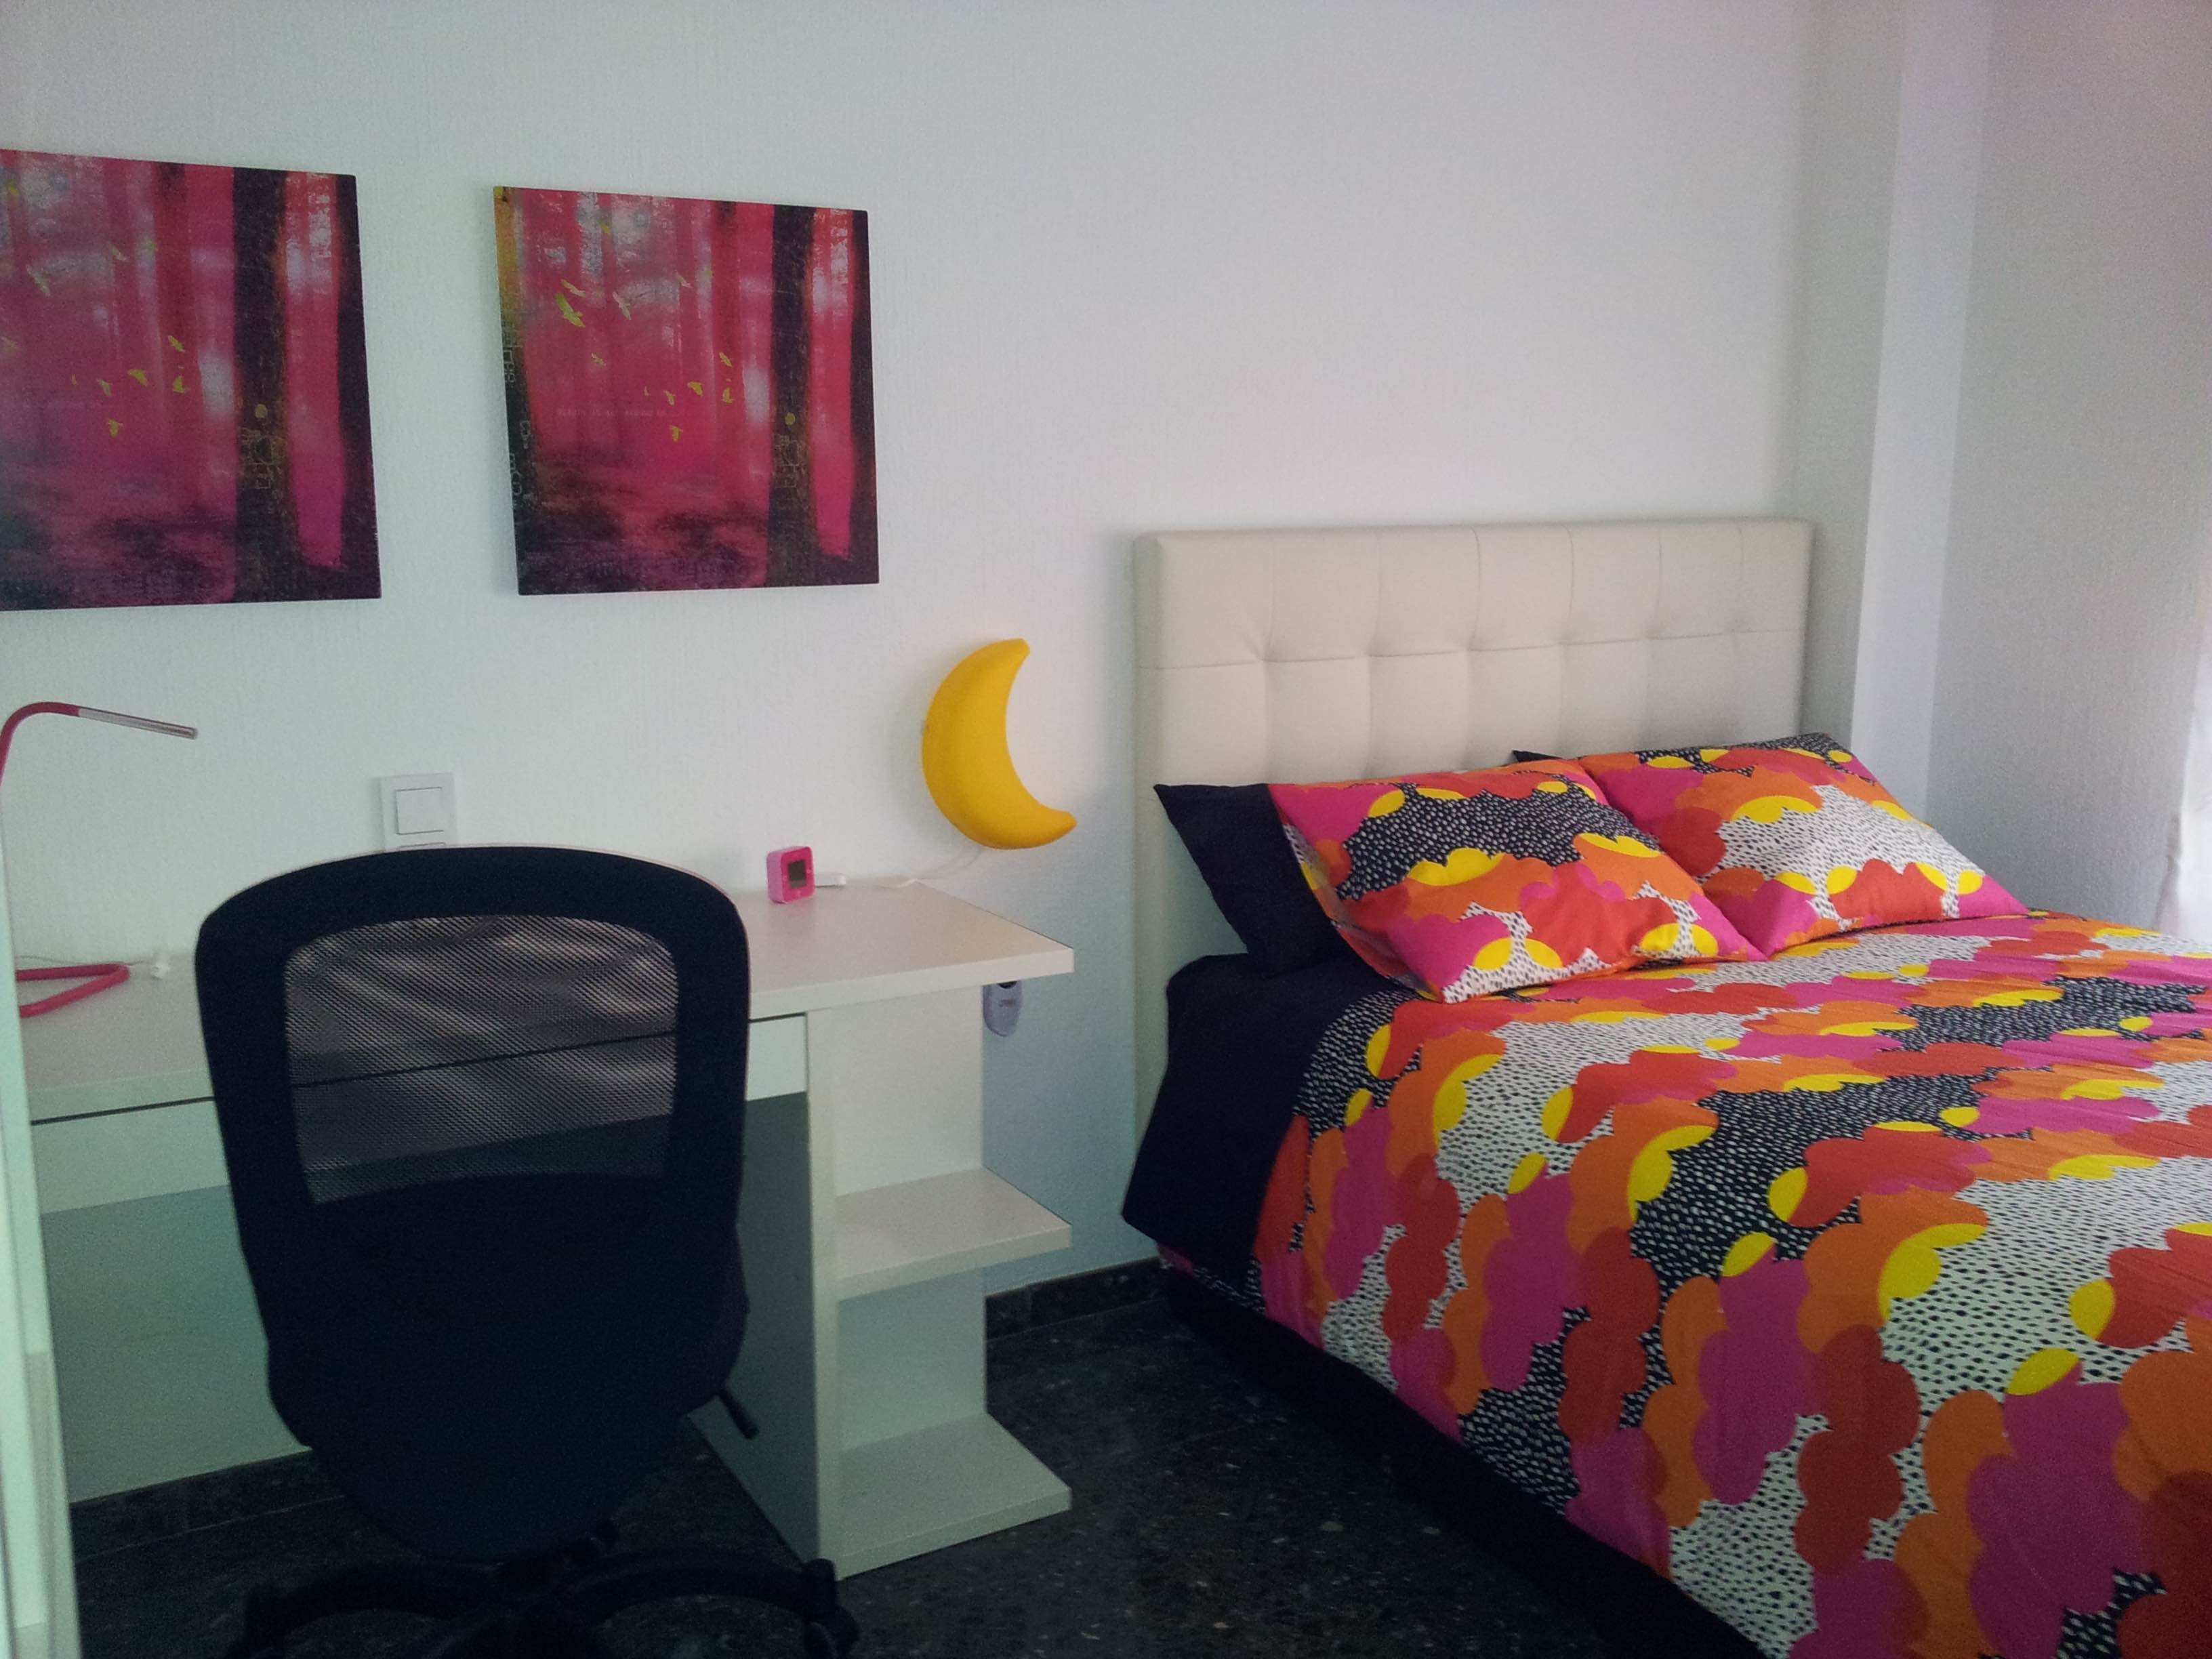 A bedroom in a shared apartment student housing in Alicante, Spain.